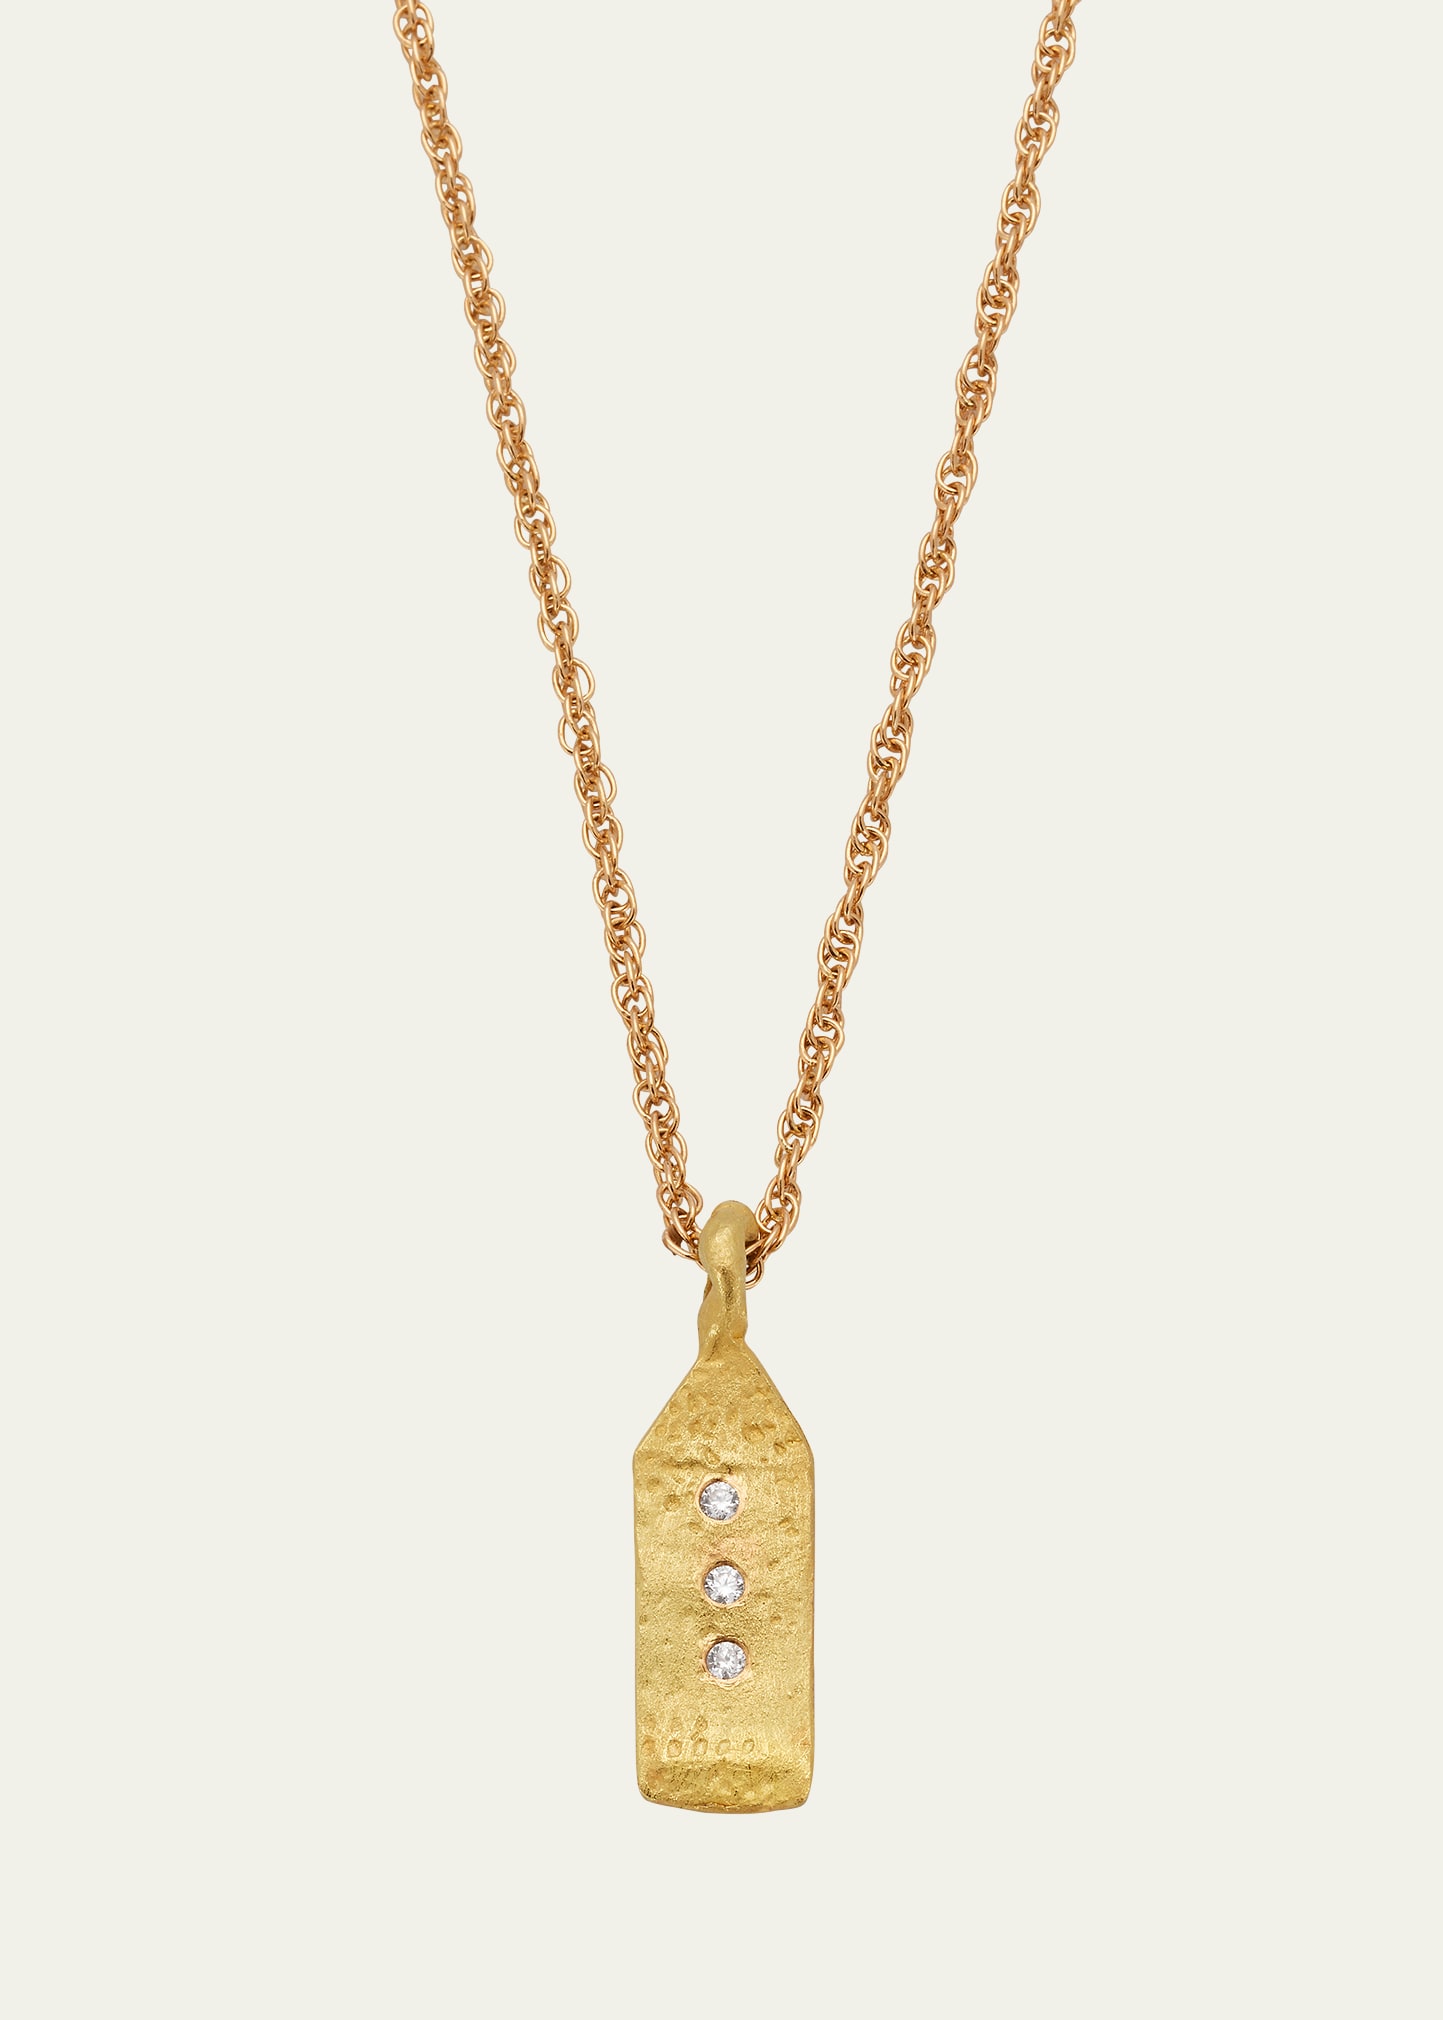 Elhanati Paloma Maison Small Tag Necklace in 18K Solid Yellow Gold with Top Wesselton VVS Diamonds